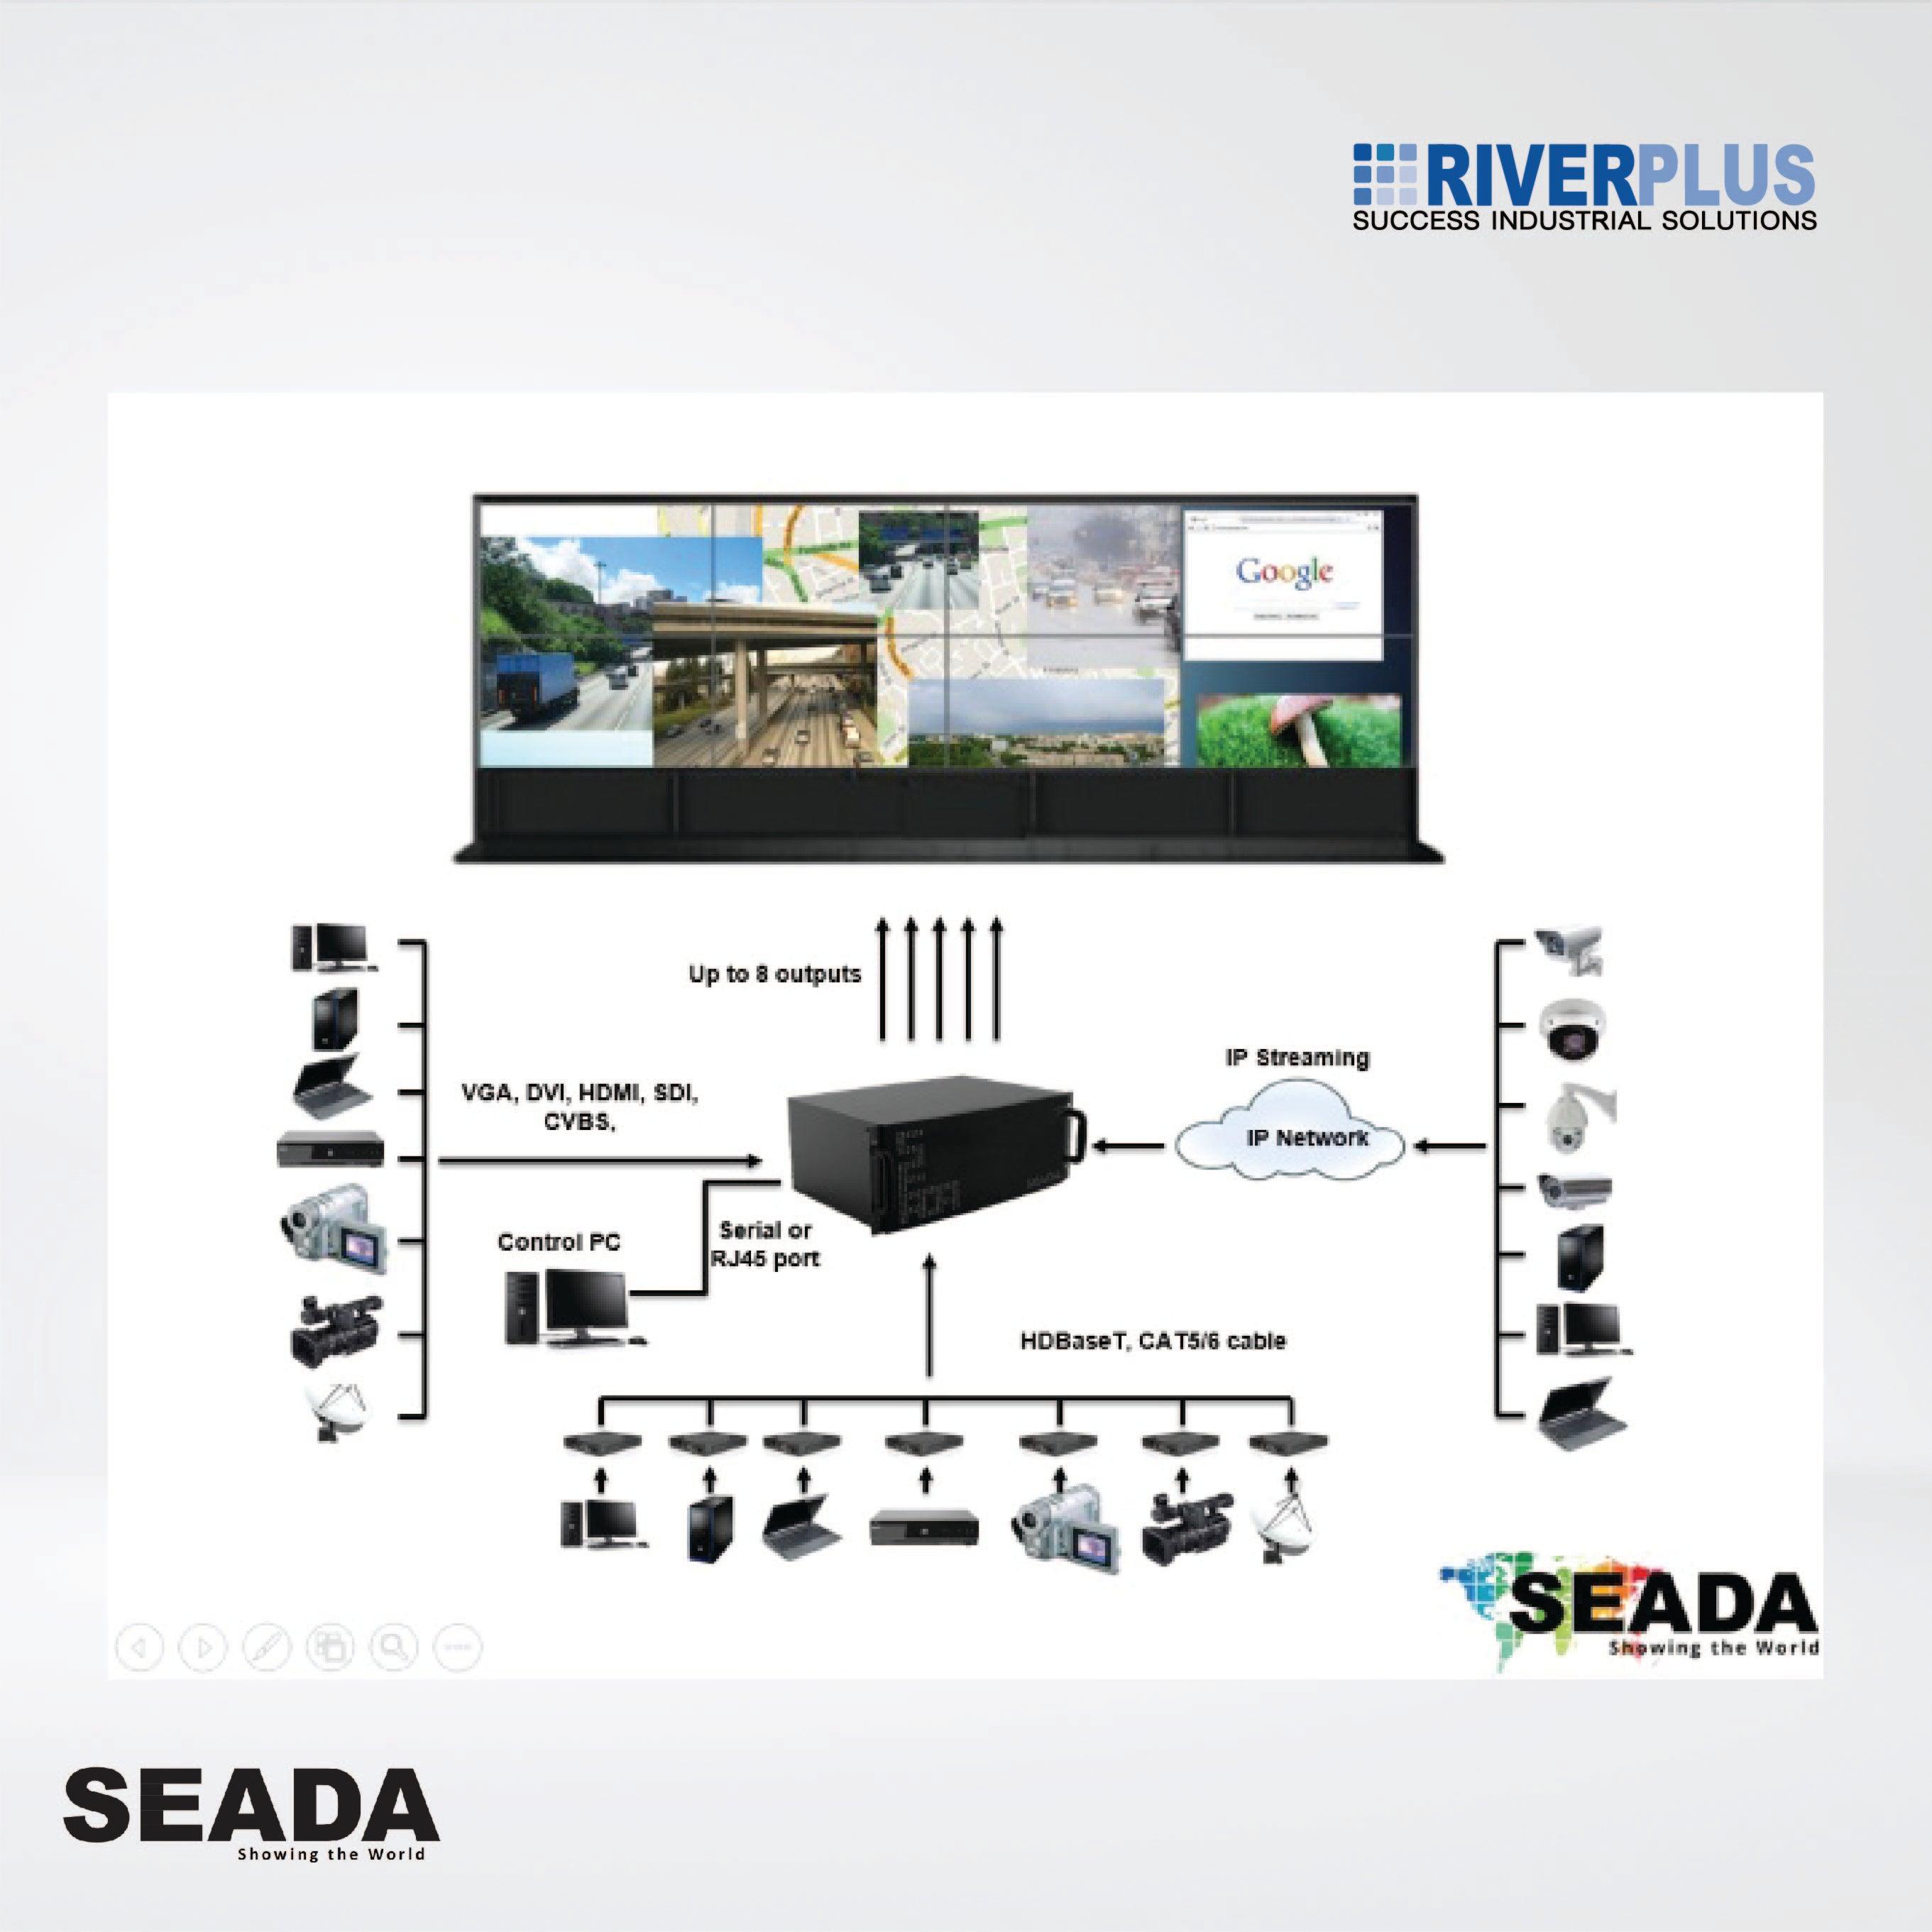 SW4008 8 Outputs and 24 HD inputs ,medium size video wall controller - Riverplus